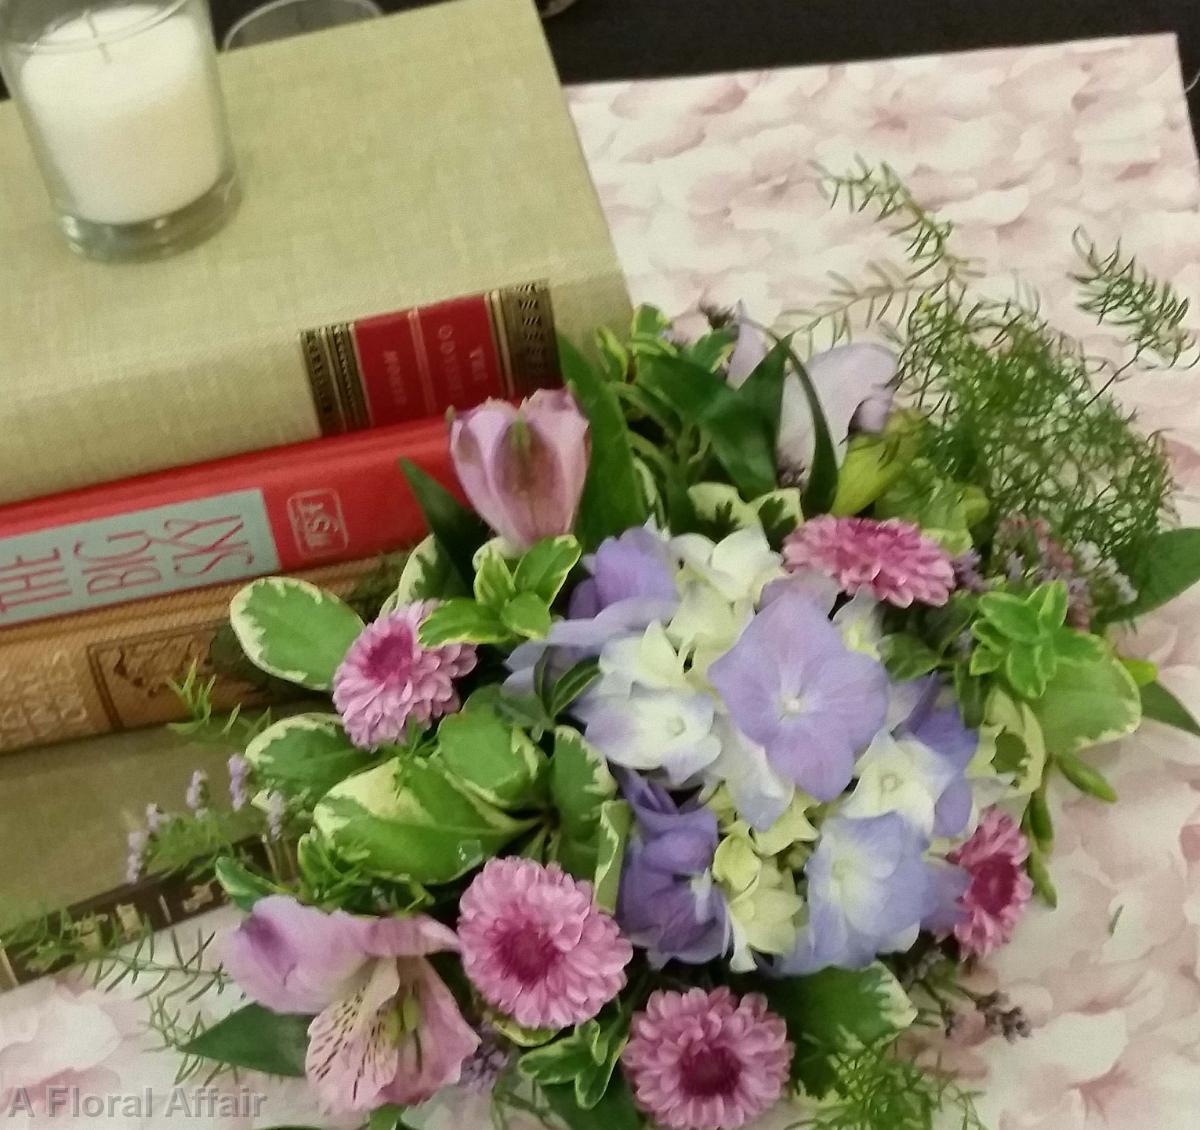 RF1199-Vintage Book and Floral Centerpiece